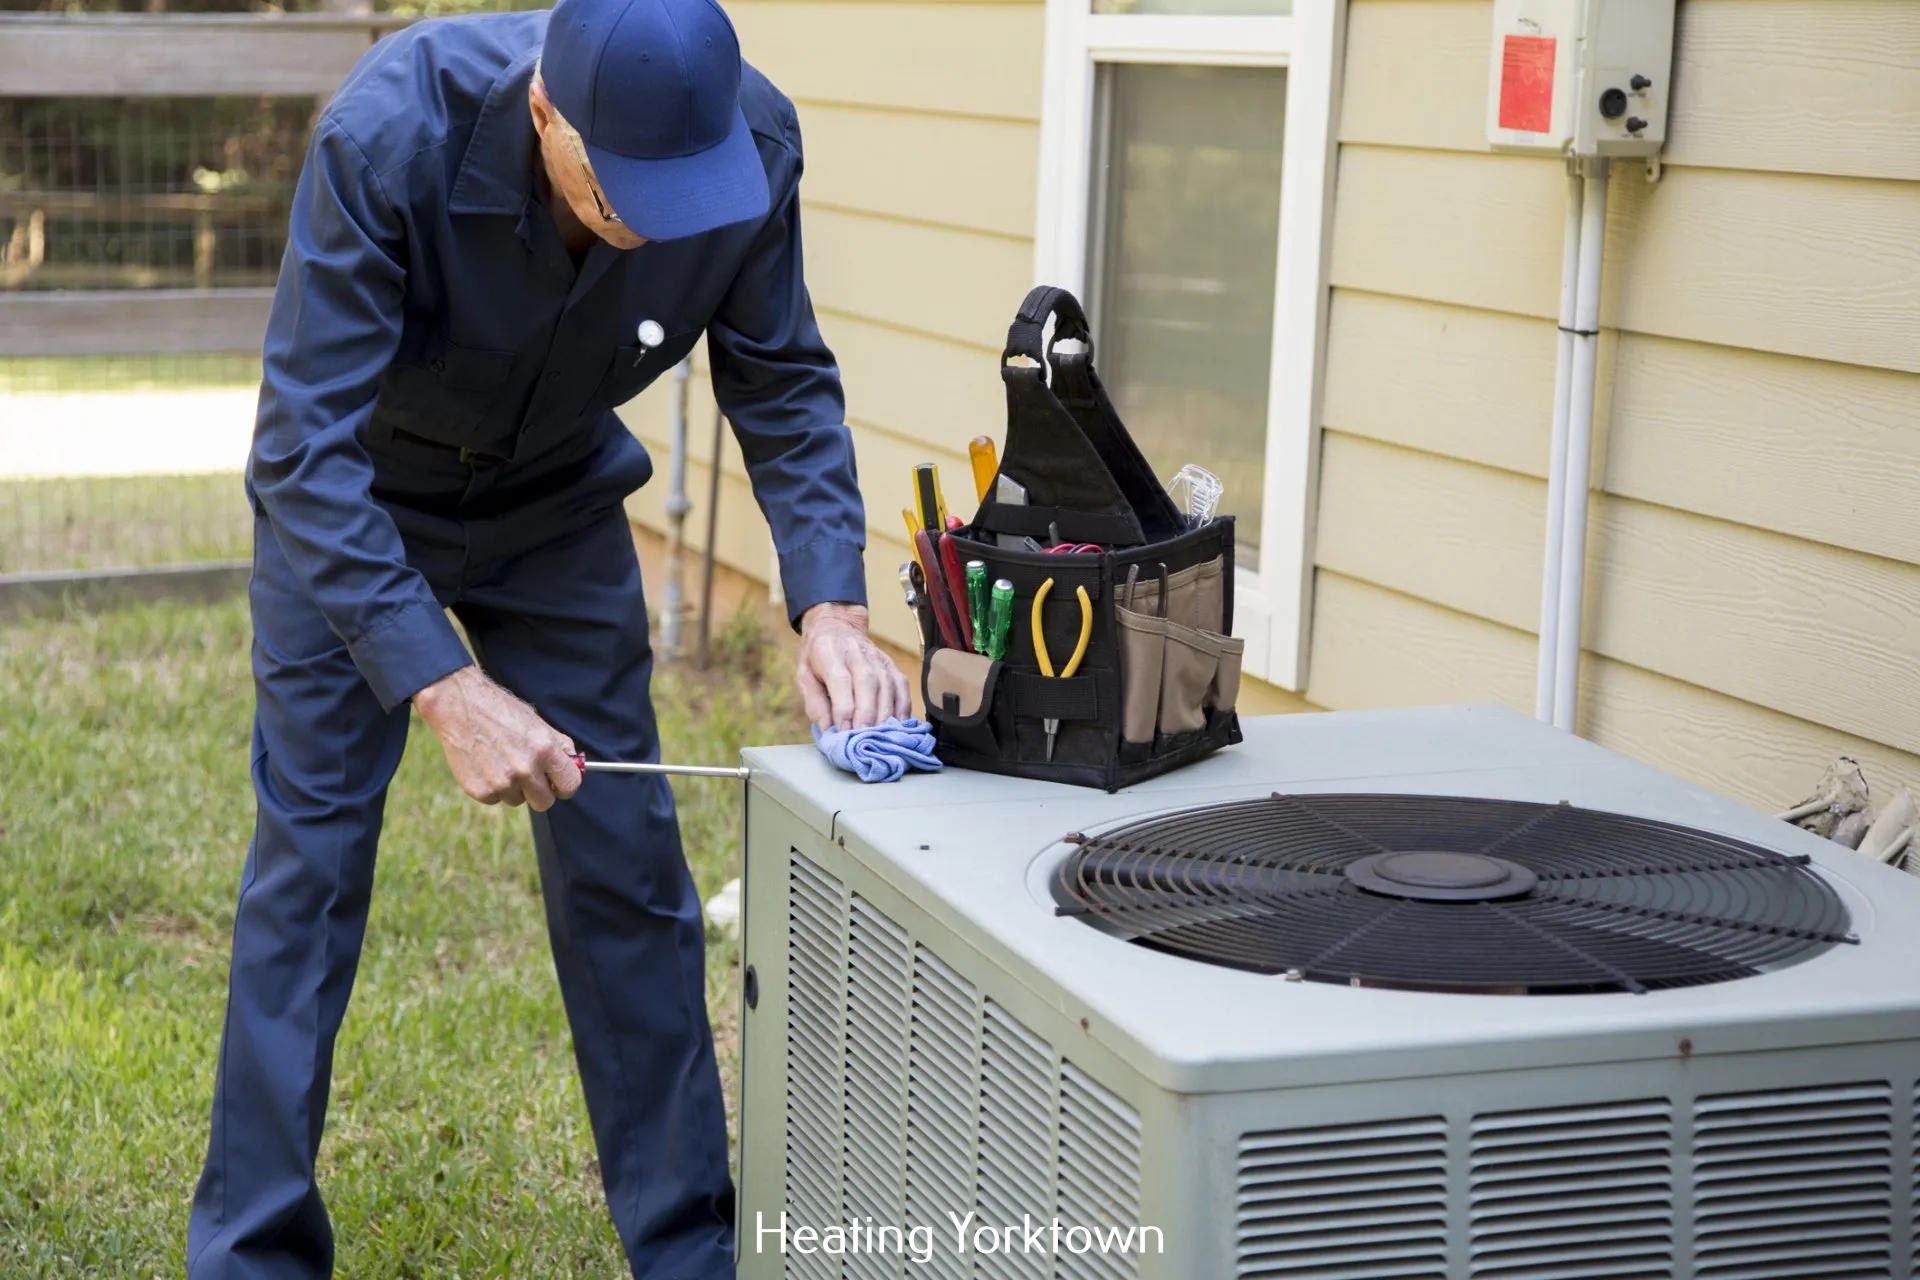 Bud's Plumbing, Heating, Air Conditioning Outlines the Importance of Properly Sized HVAC Units